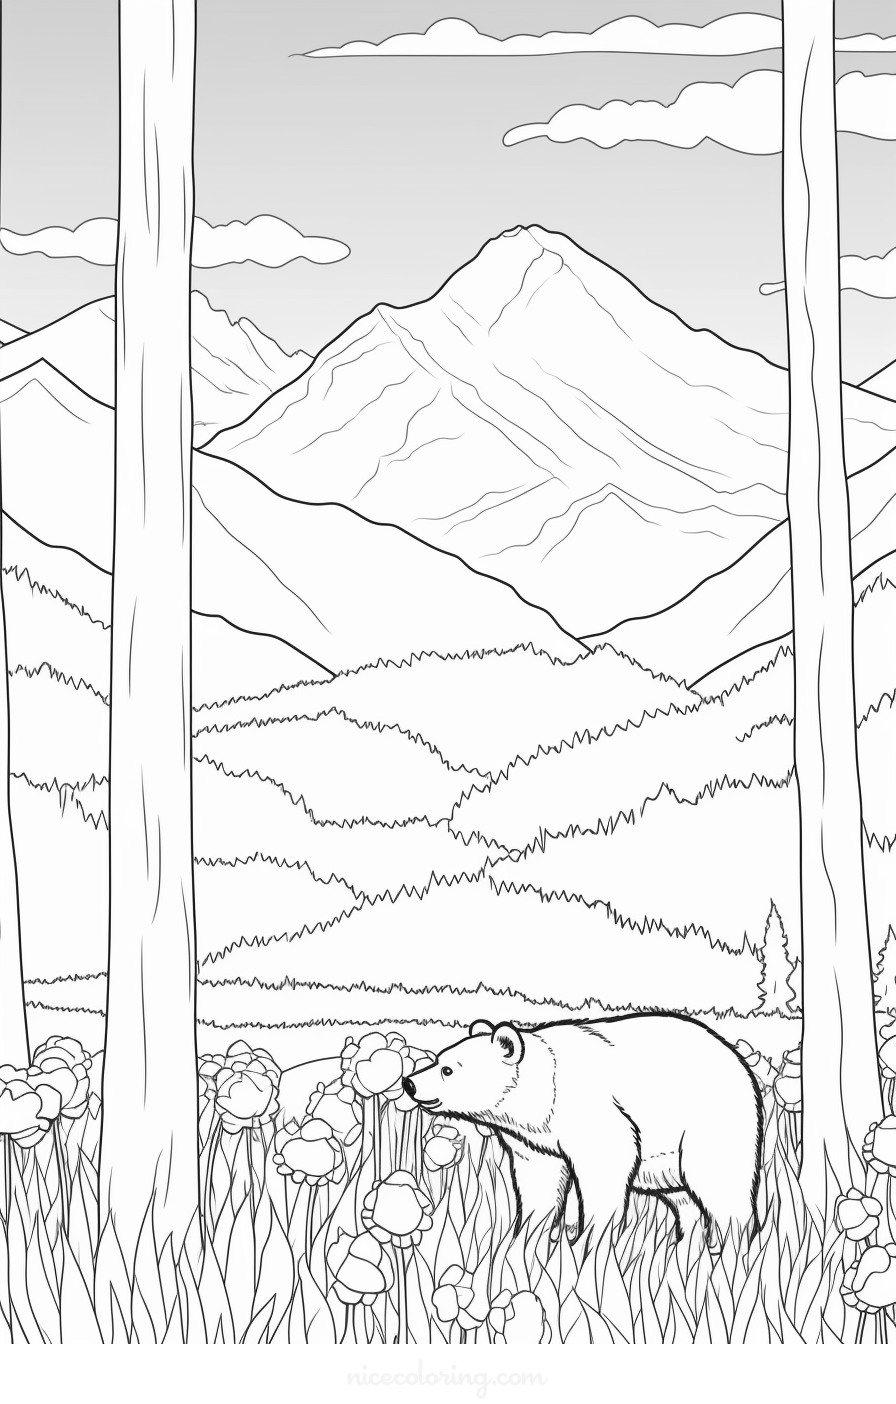 Bear in a forest scene coloring